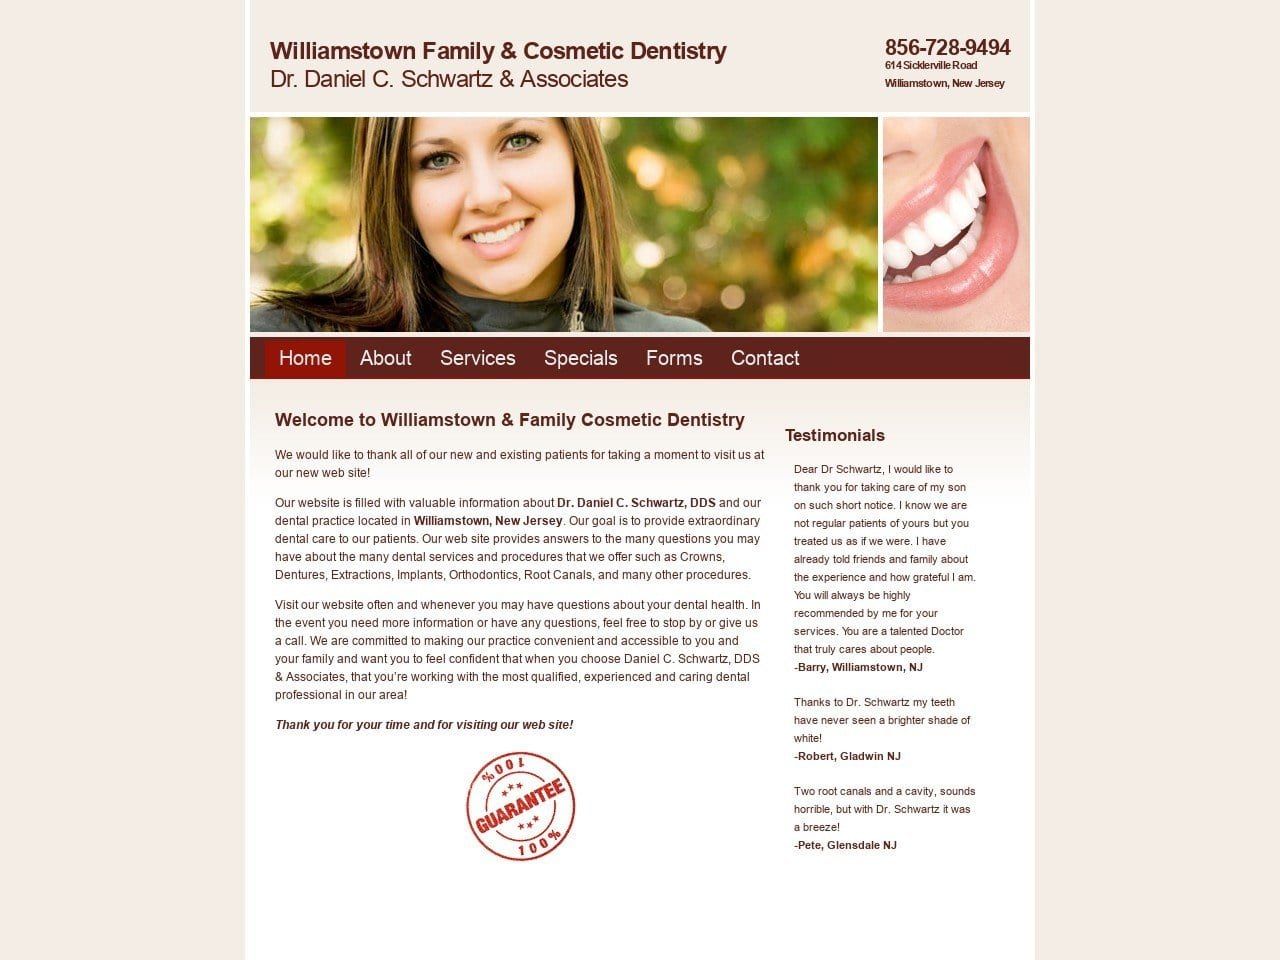 Williamstown Family Dentistry Website Screenshot from williamstowndentistry.com